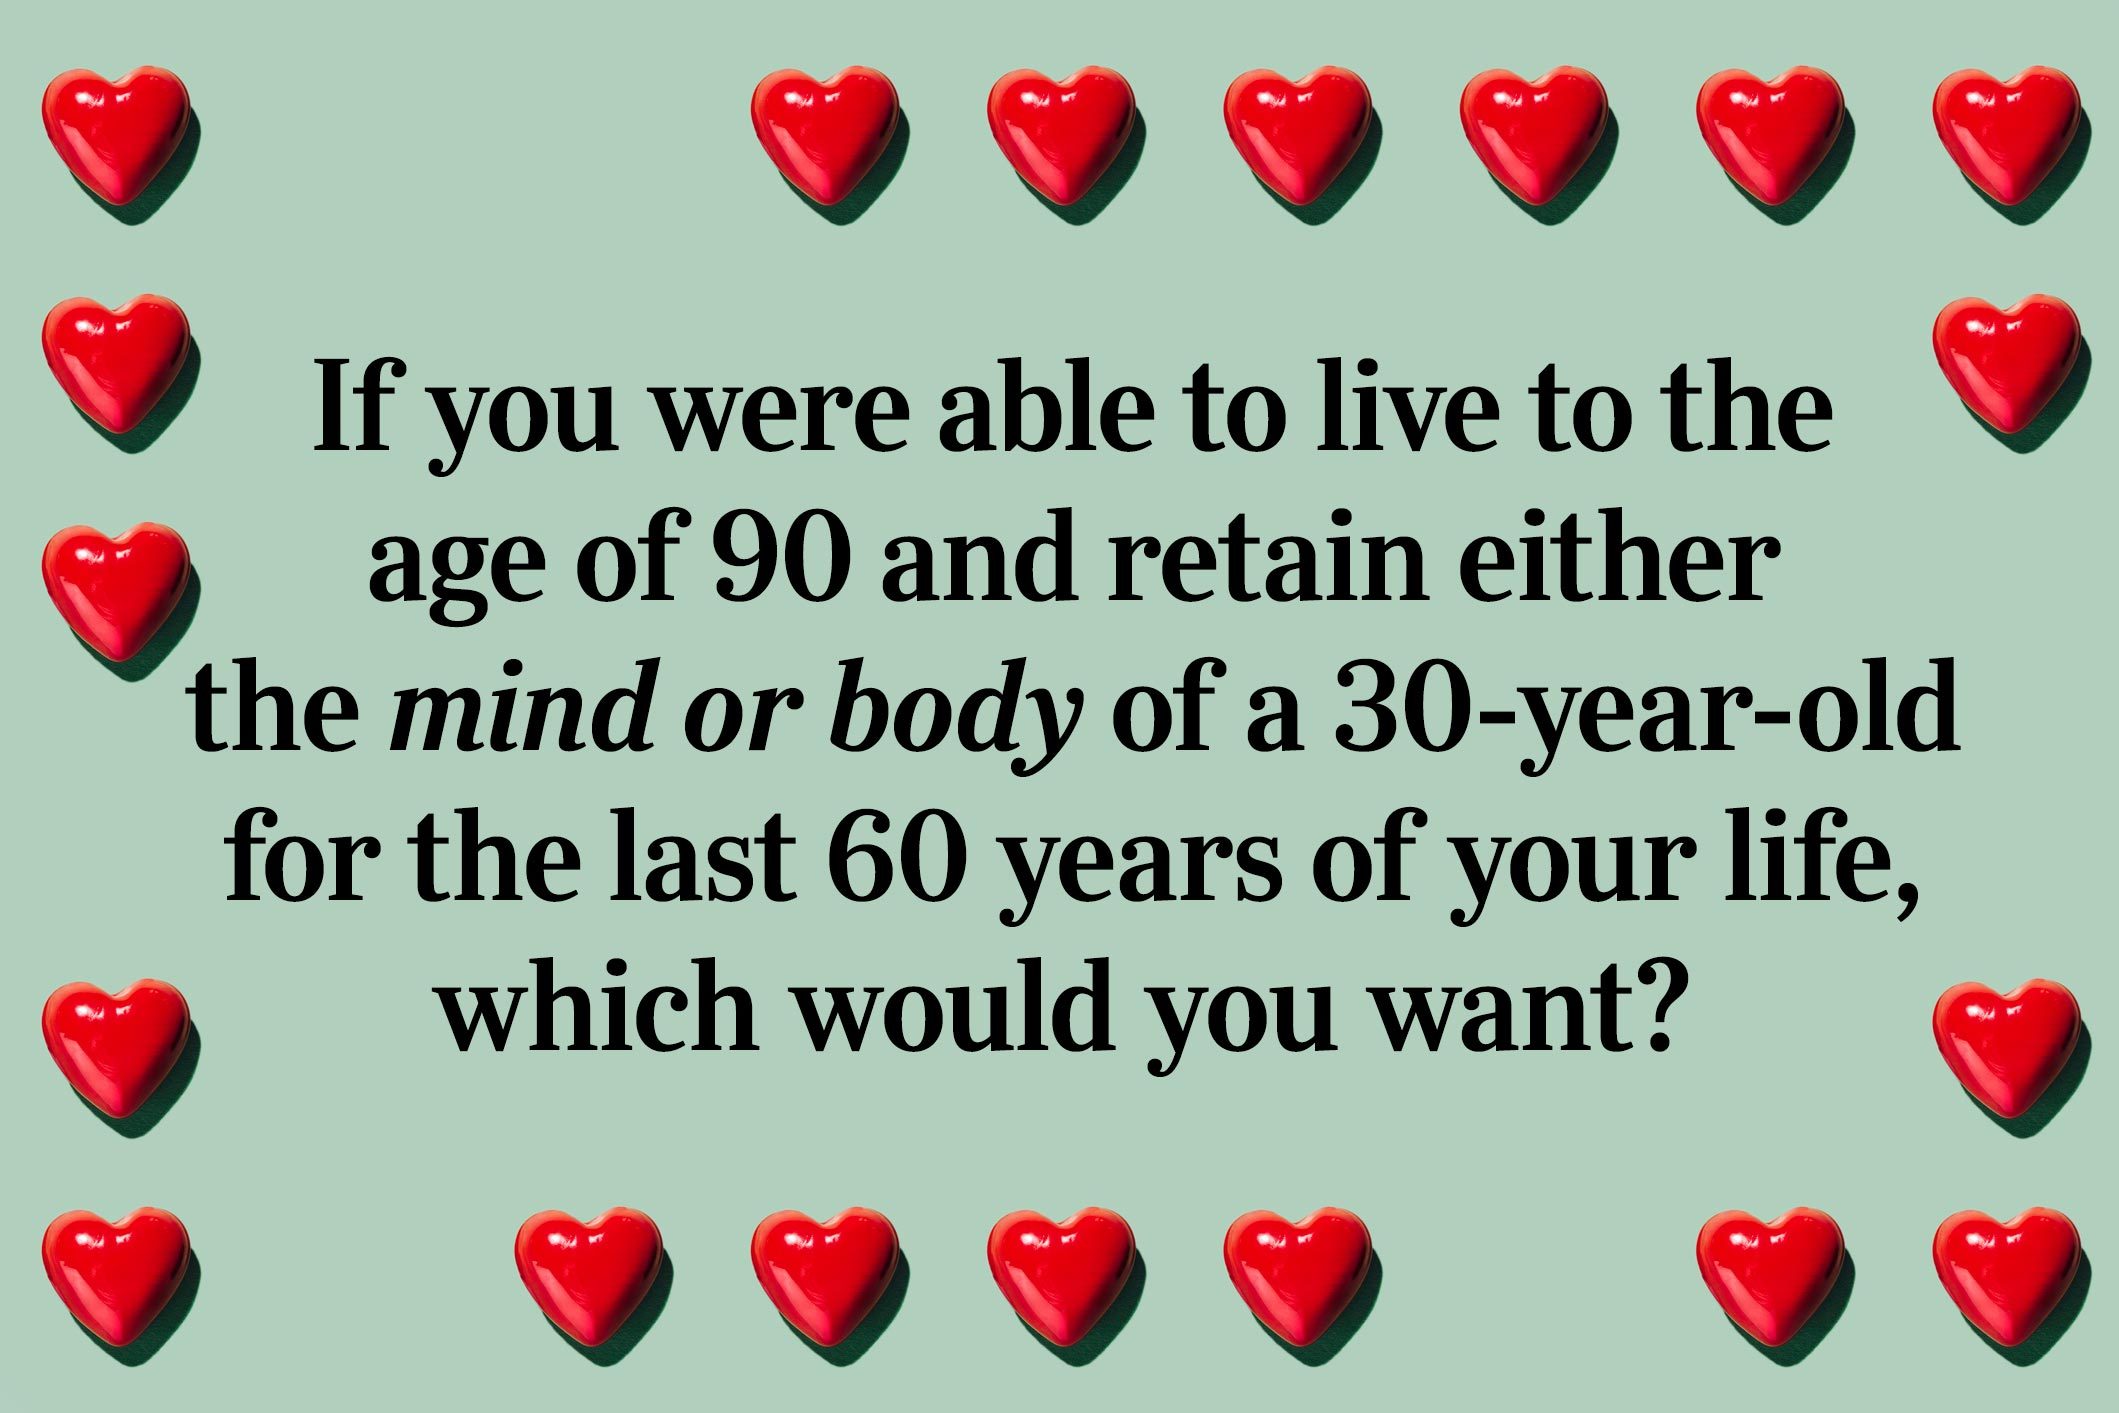 <p>If you were able to live to the age of 90 and retain either the mind or body of a 30-year-old for the last 60 years of your life, which would you want?</p> <p>Don't forget to play some <a href="https://www.rd.com/article/brain-games-quizzes-puzzles/">brain games</a> and give your mind a workout.</p>